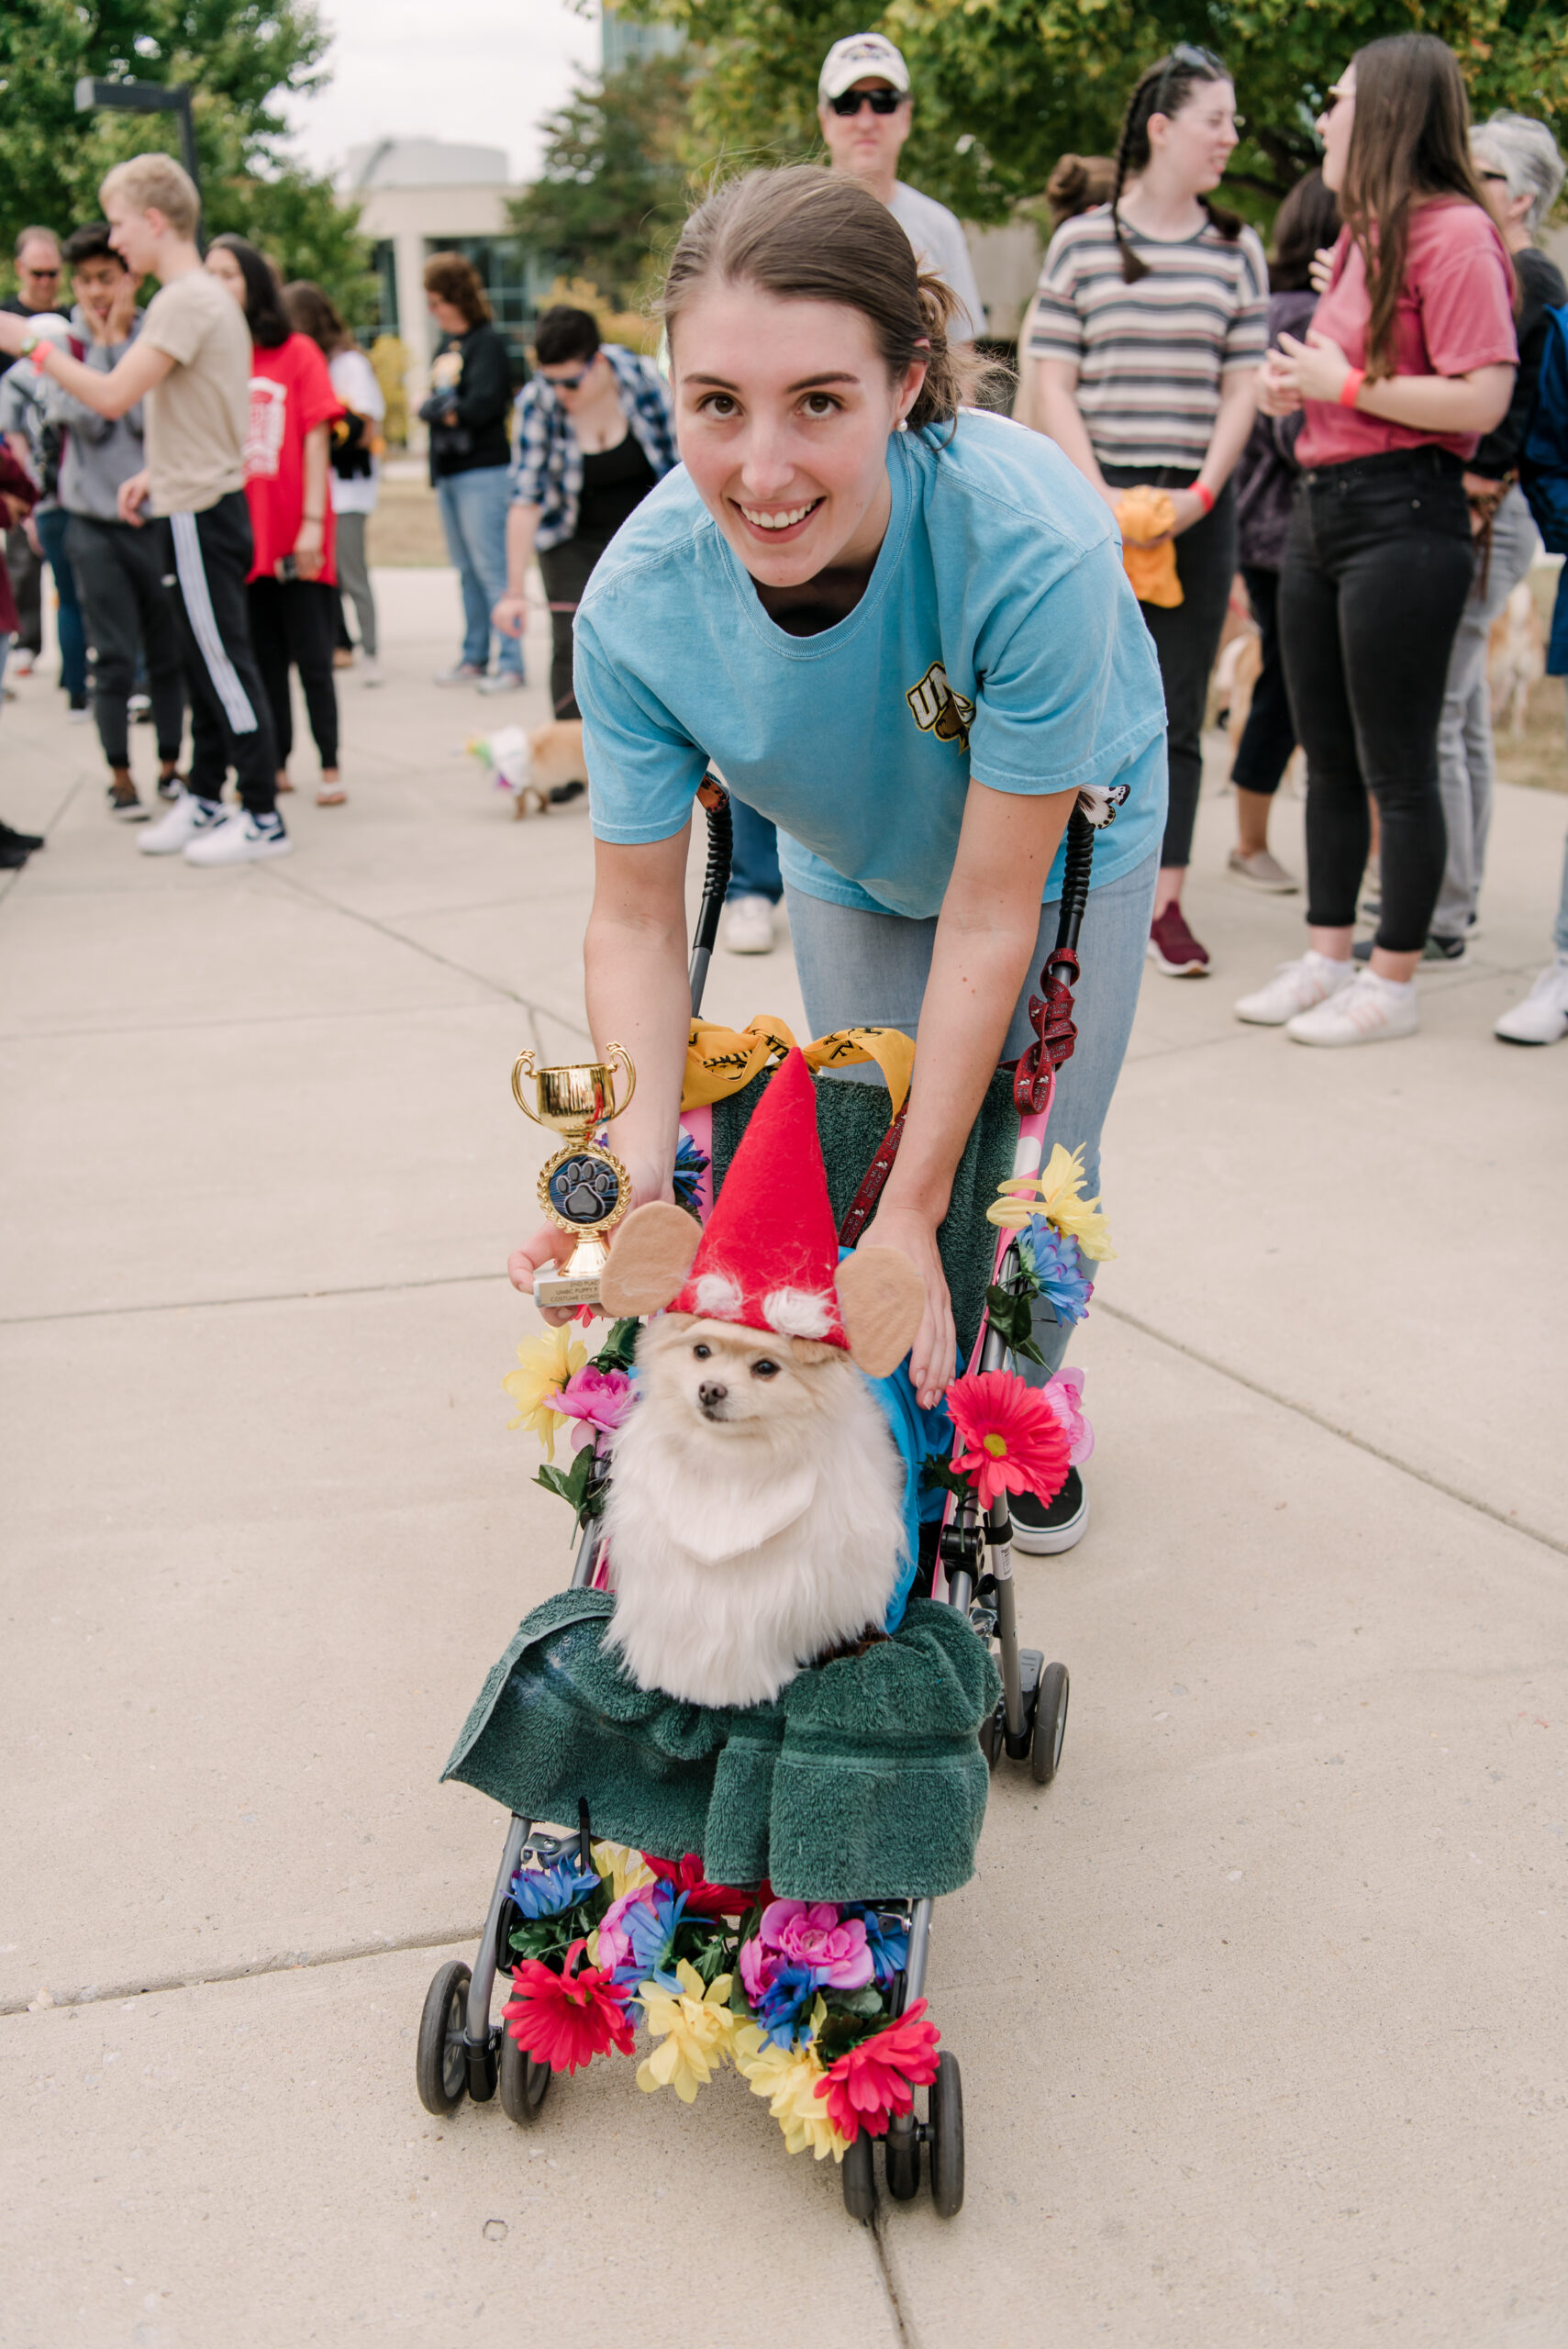 woman holds costumed dog on decorated stroller